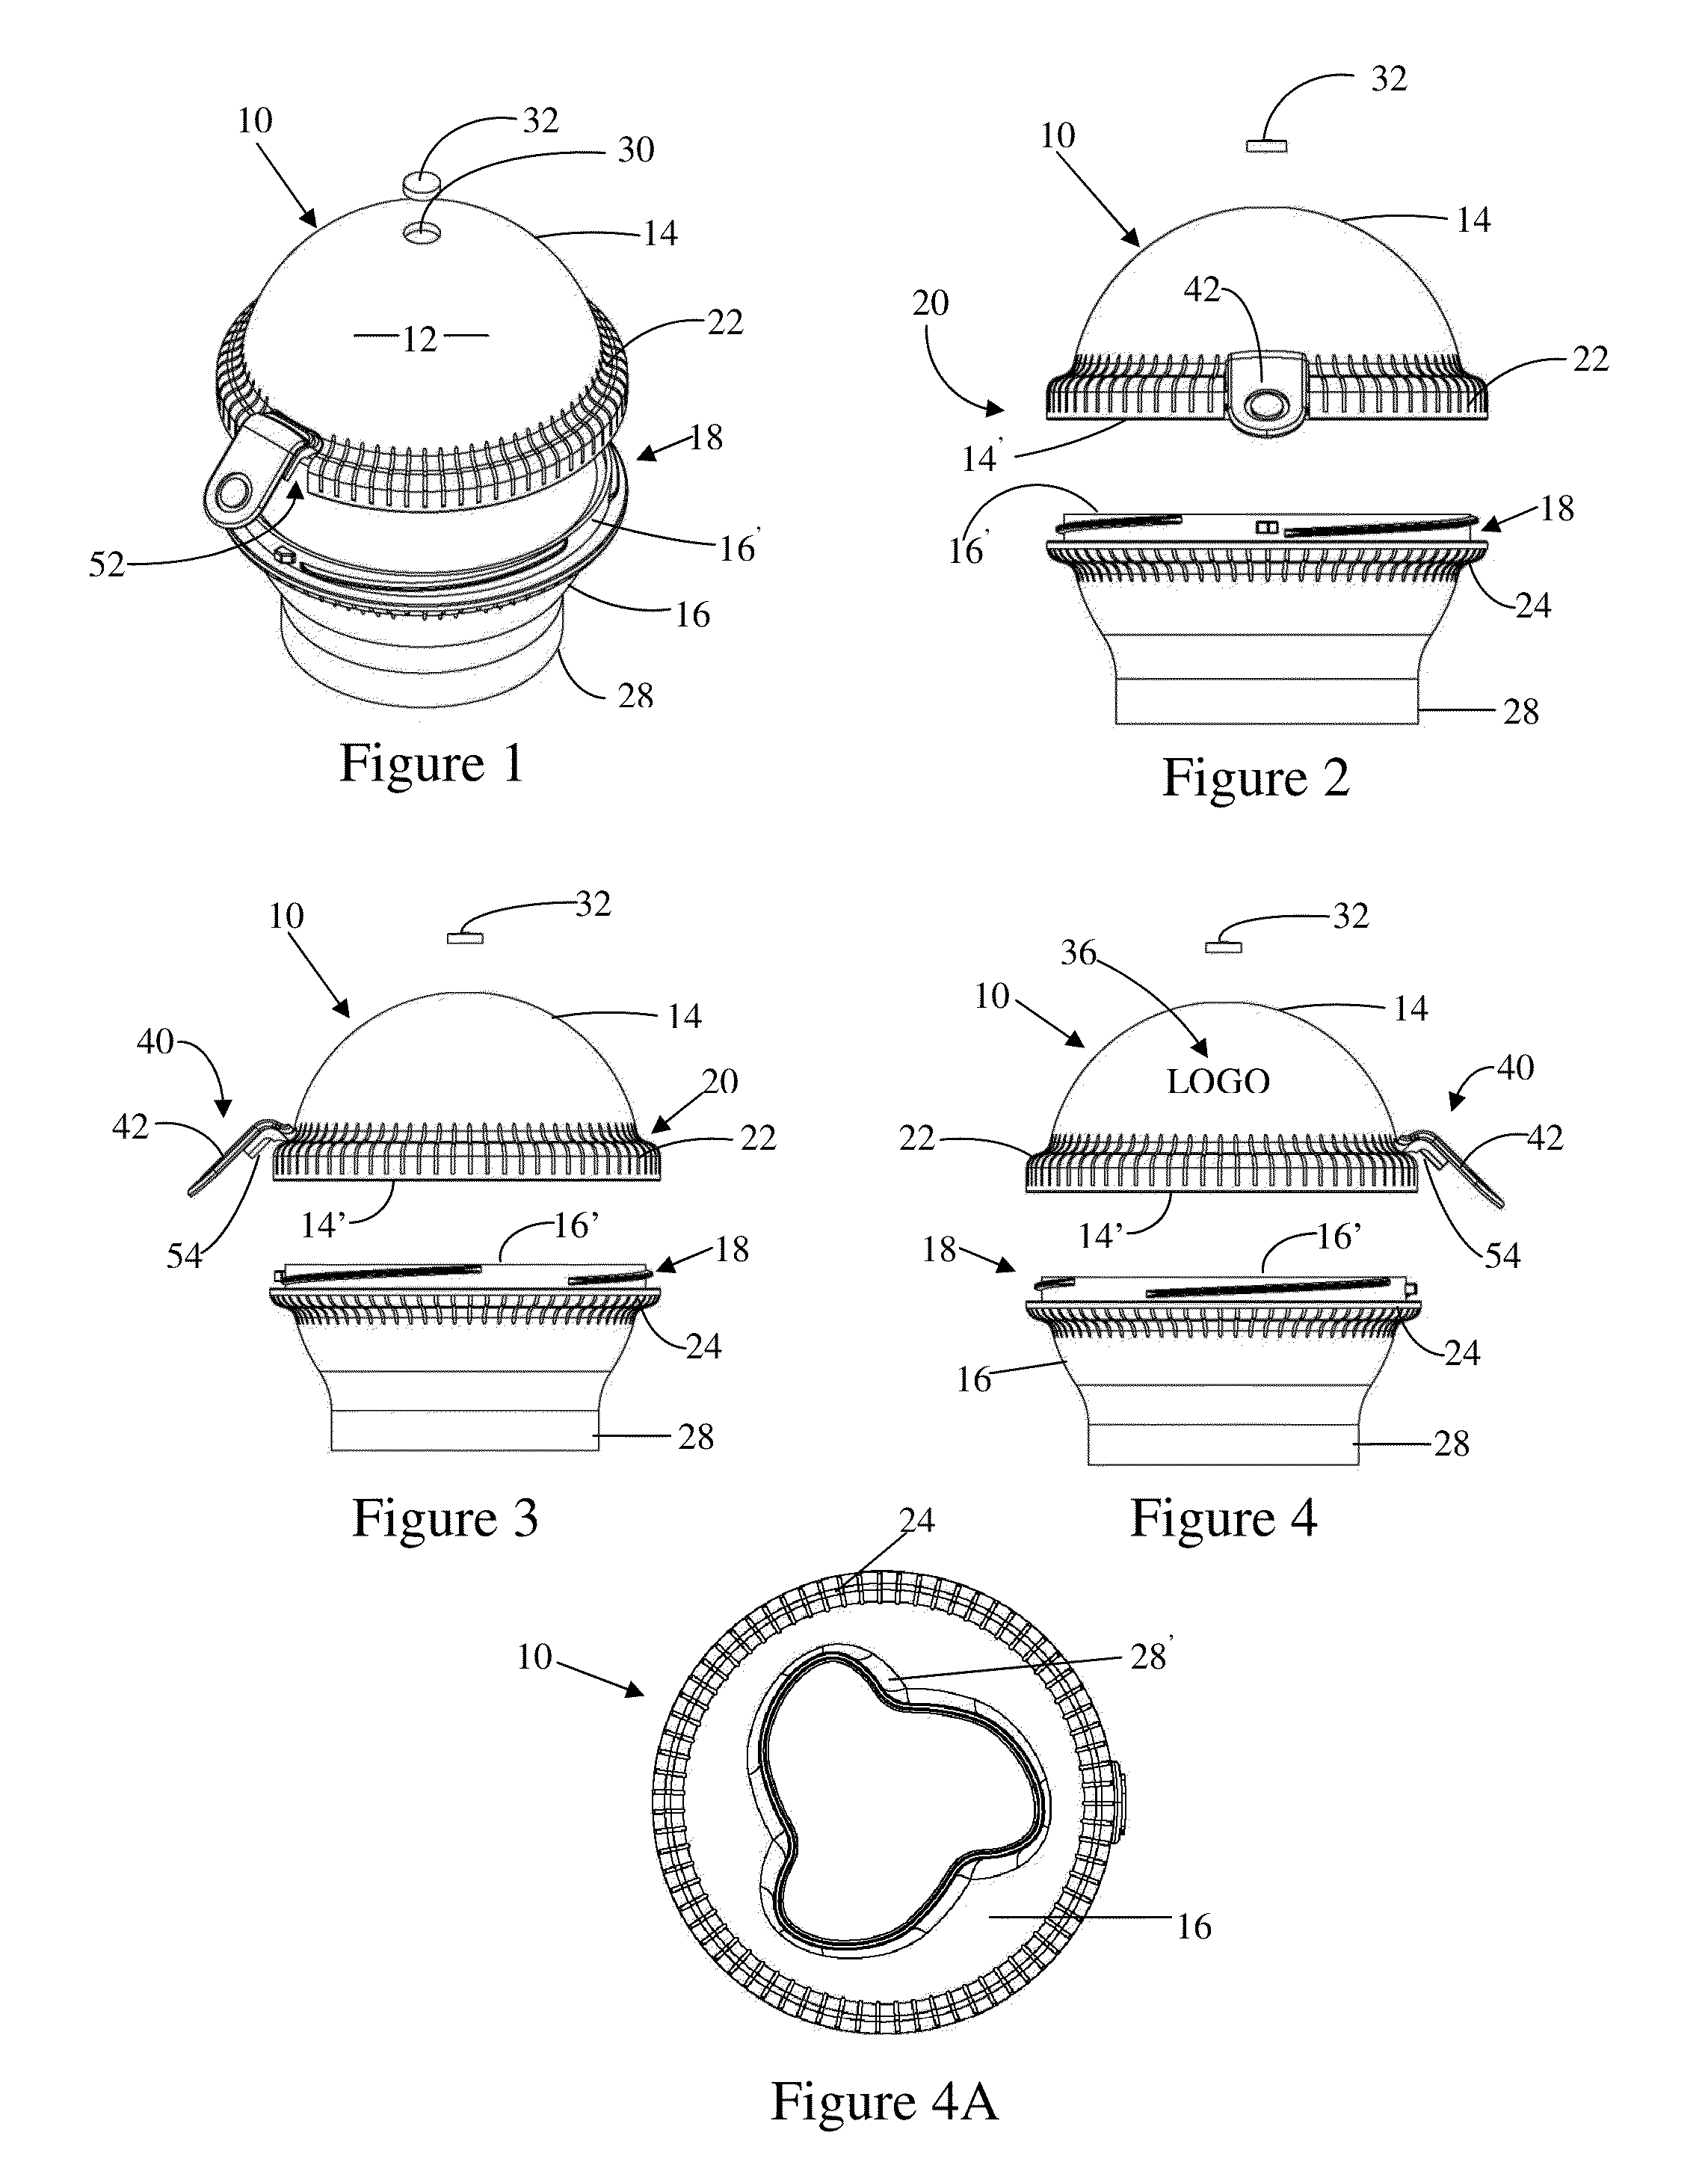 Apparatus for forming a frozen liquid product